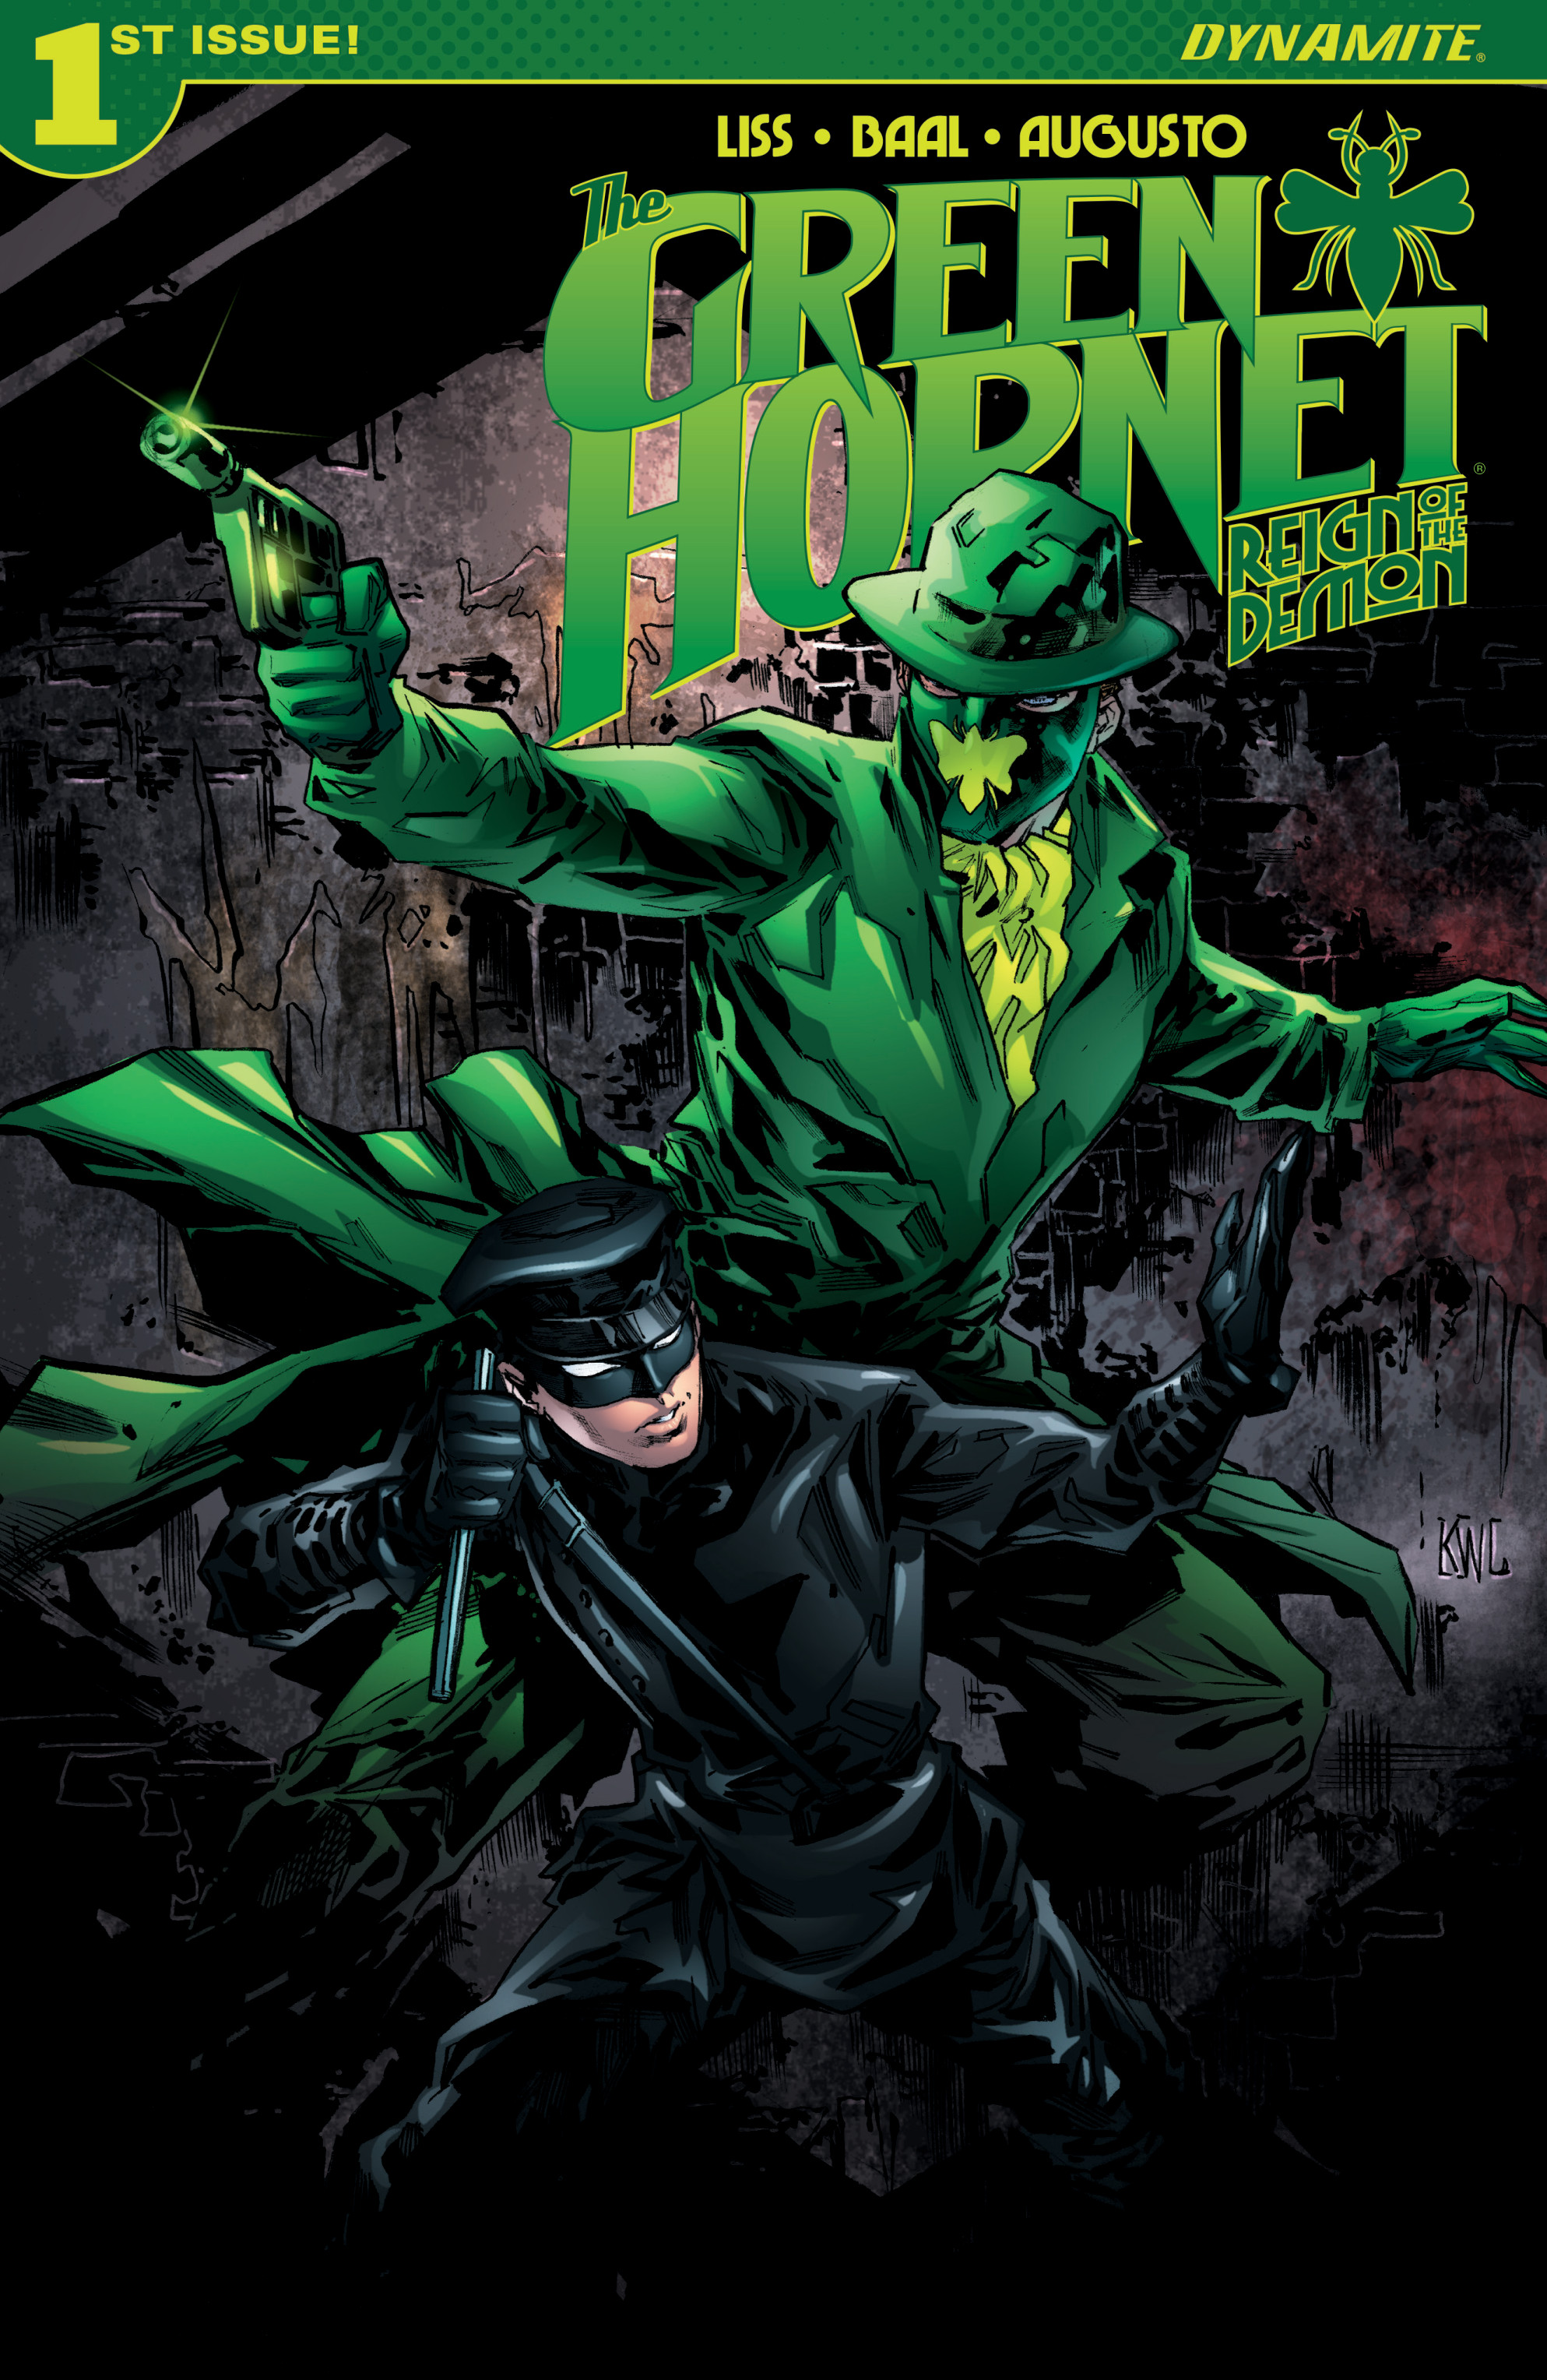 Read online Green Hornet: Reign of The Demon comic -  Issue #1 - 1